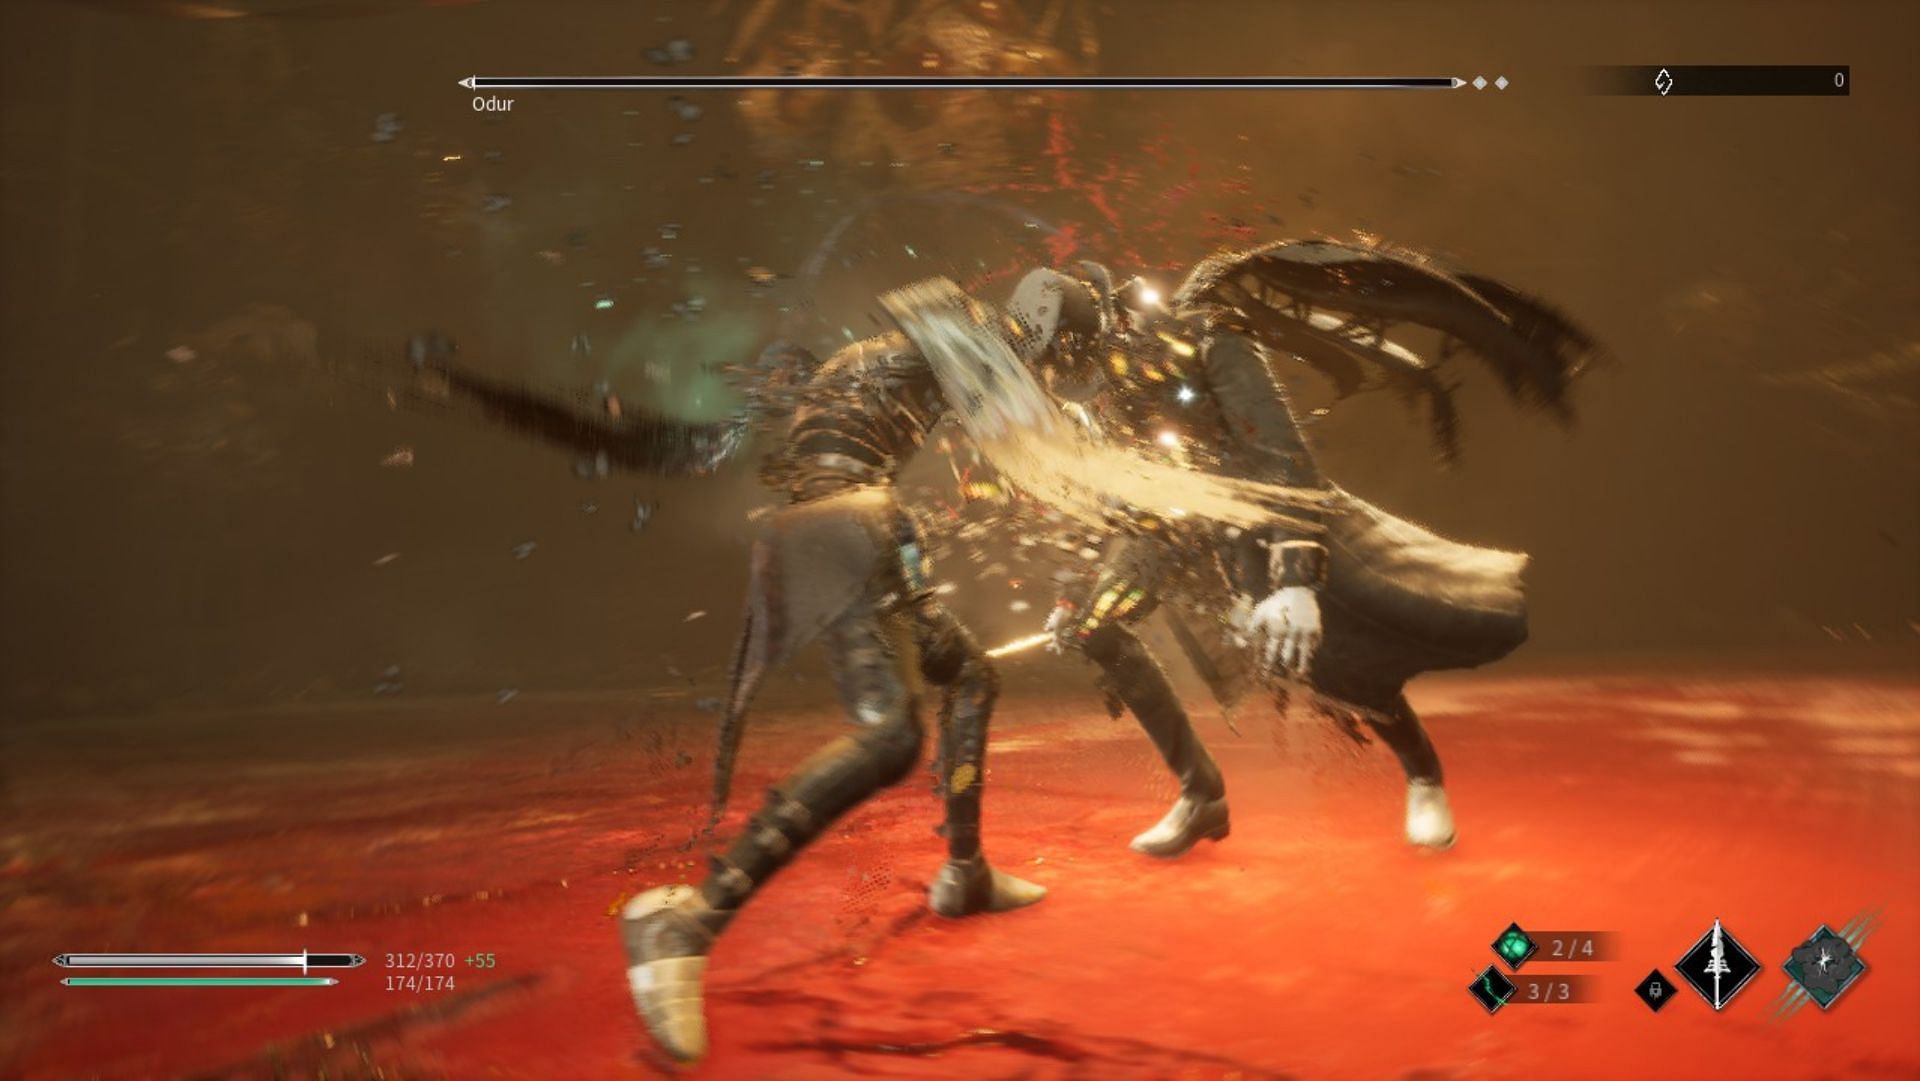 Defeating a boss feels truly rewarding in Thymesia (Image via Team17)